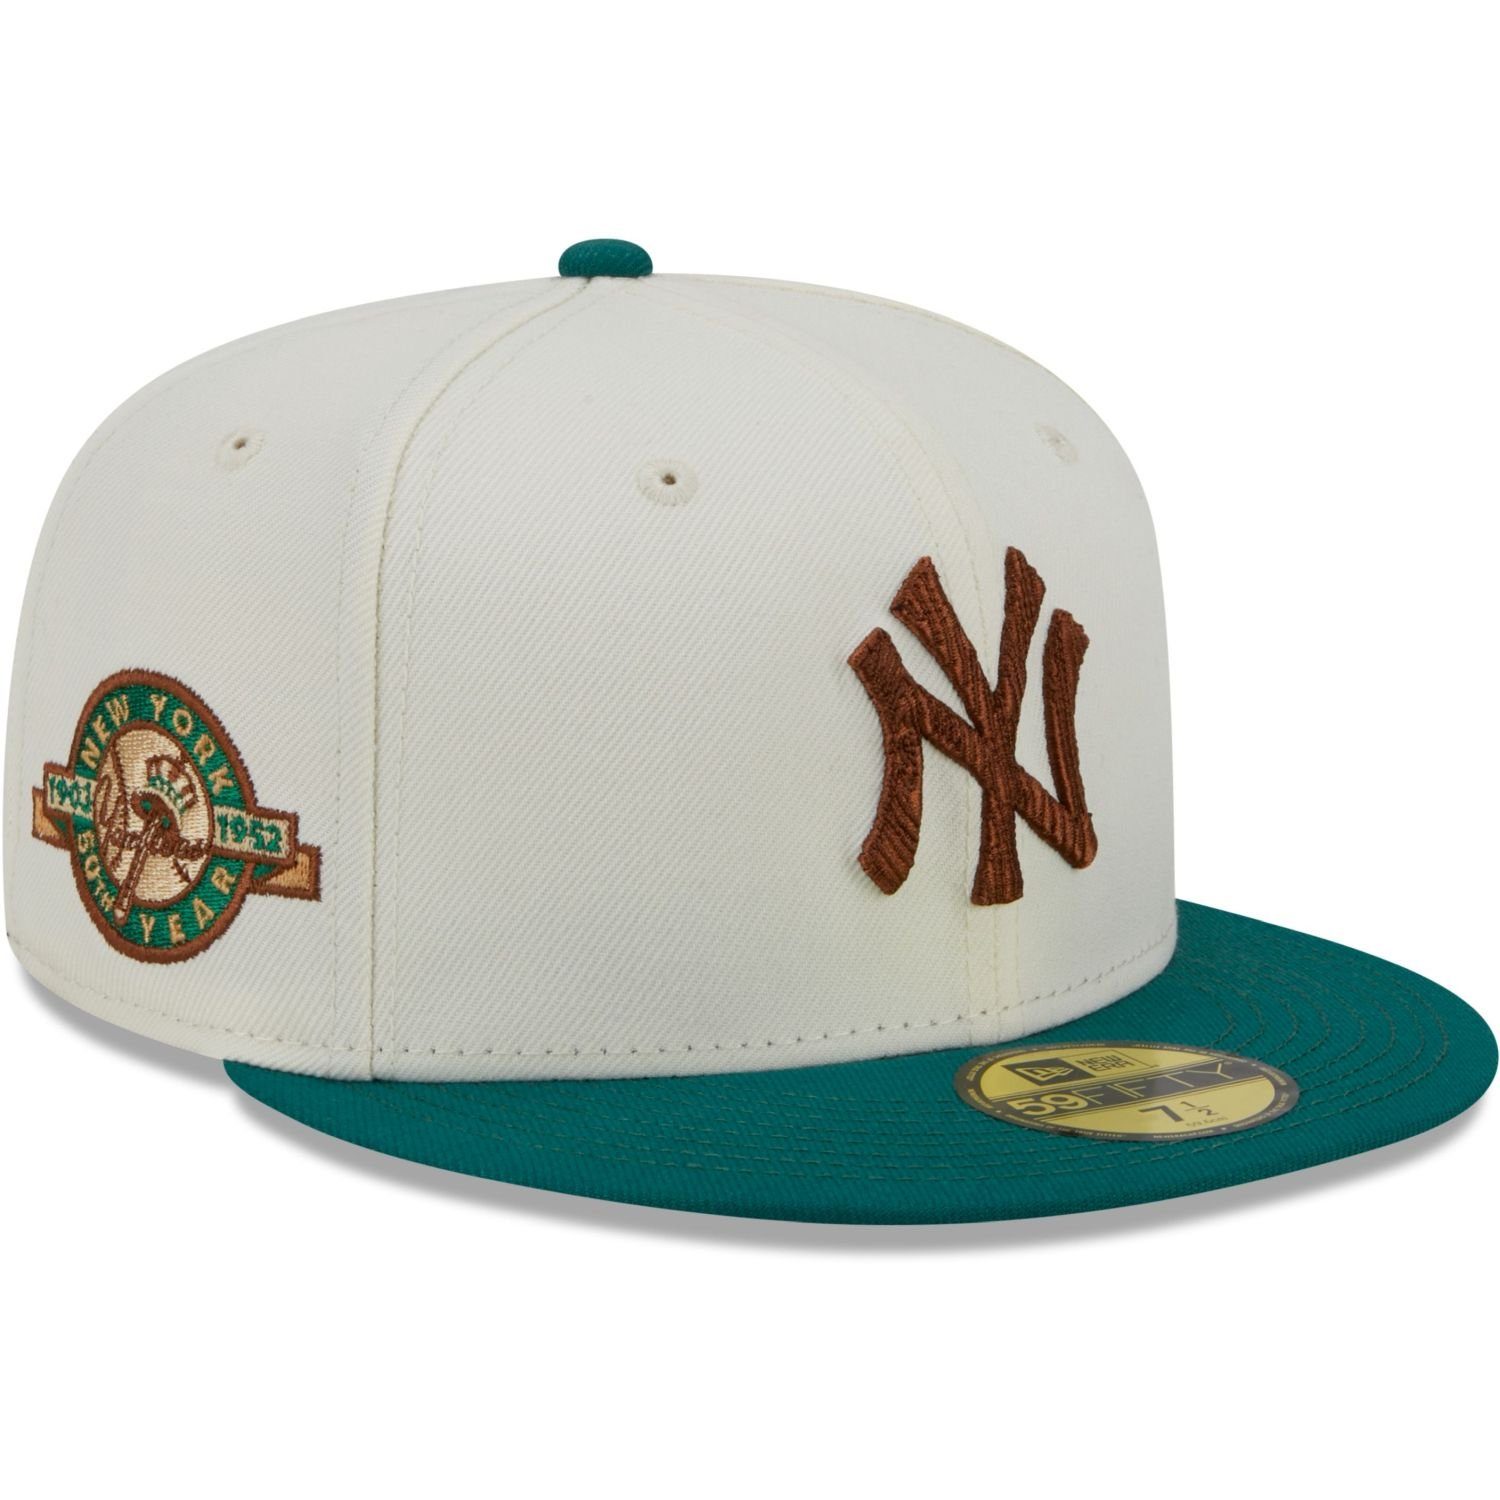 New Era Fitted Cap 59Fifty CAMP New York Yankees